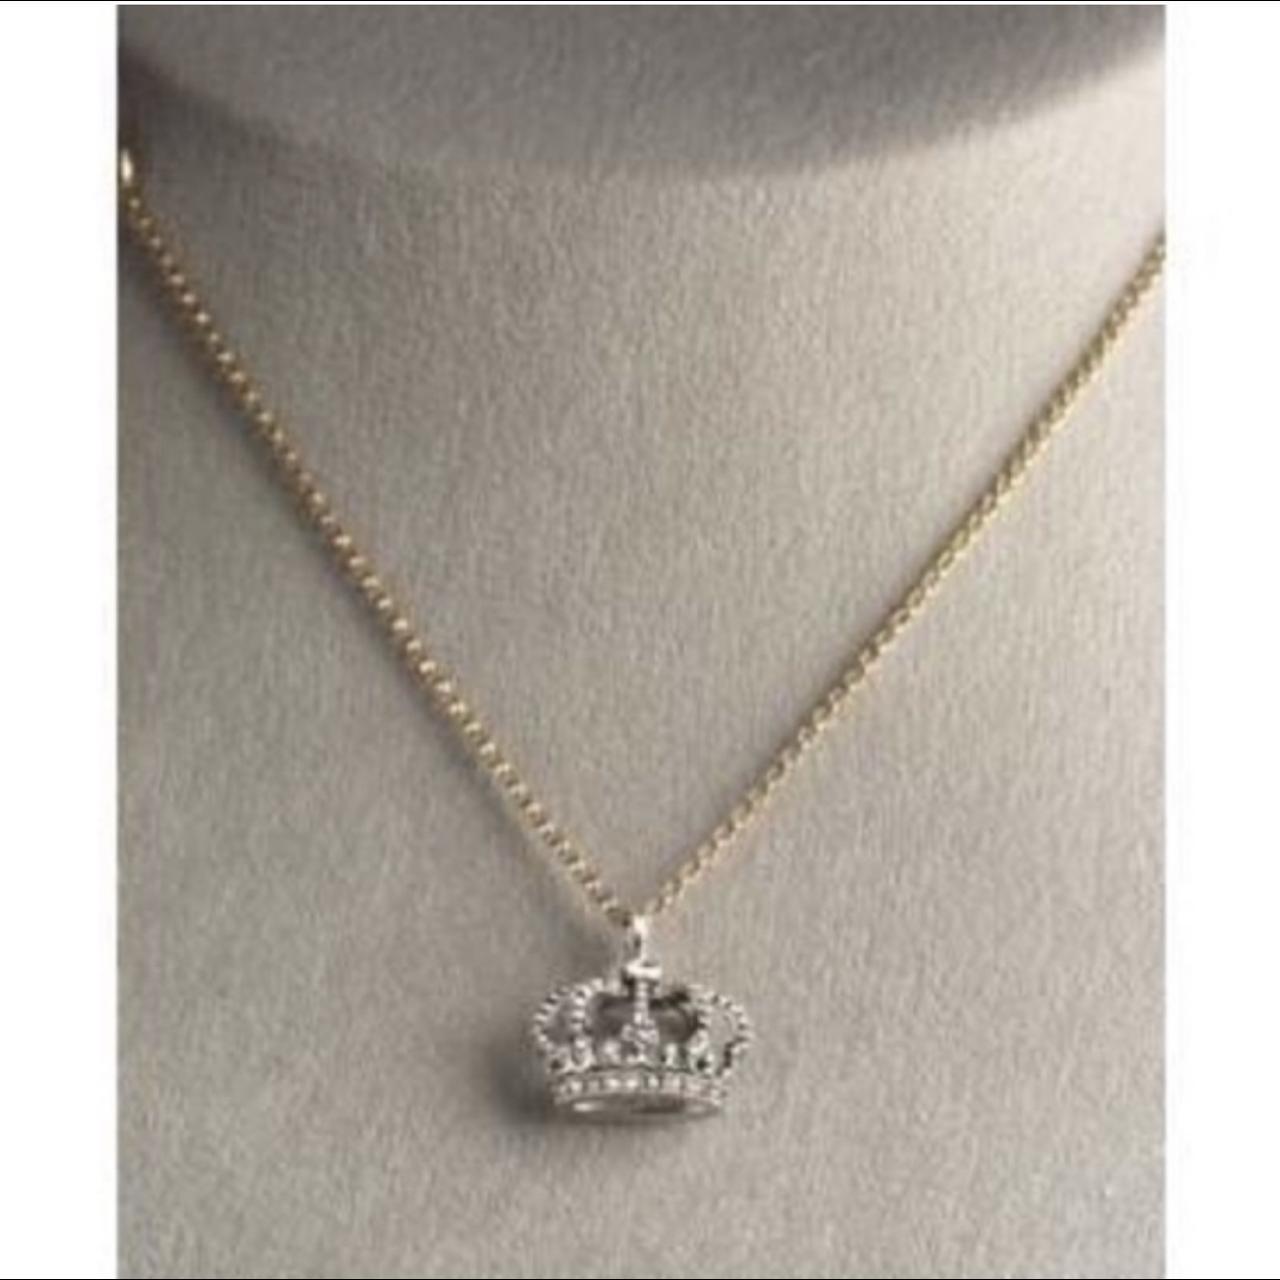 Juicy Couture, Jewelry, Juicy Couture Crown Necklace